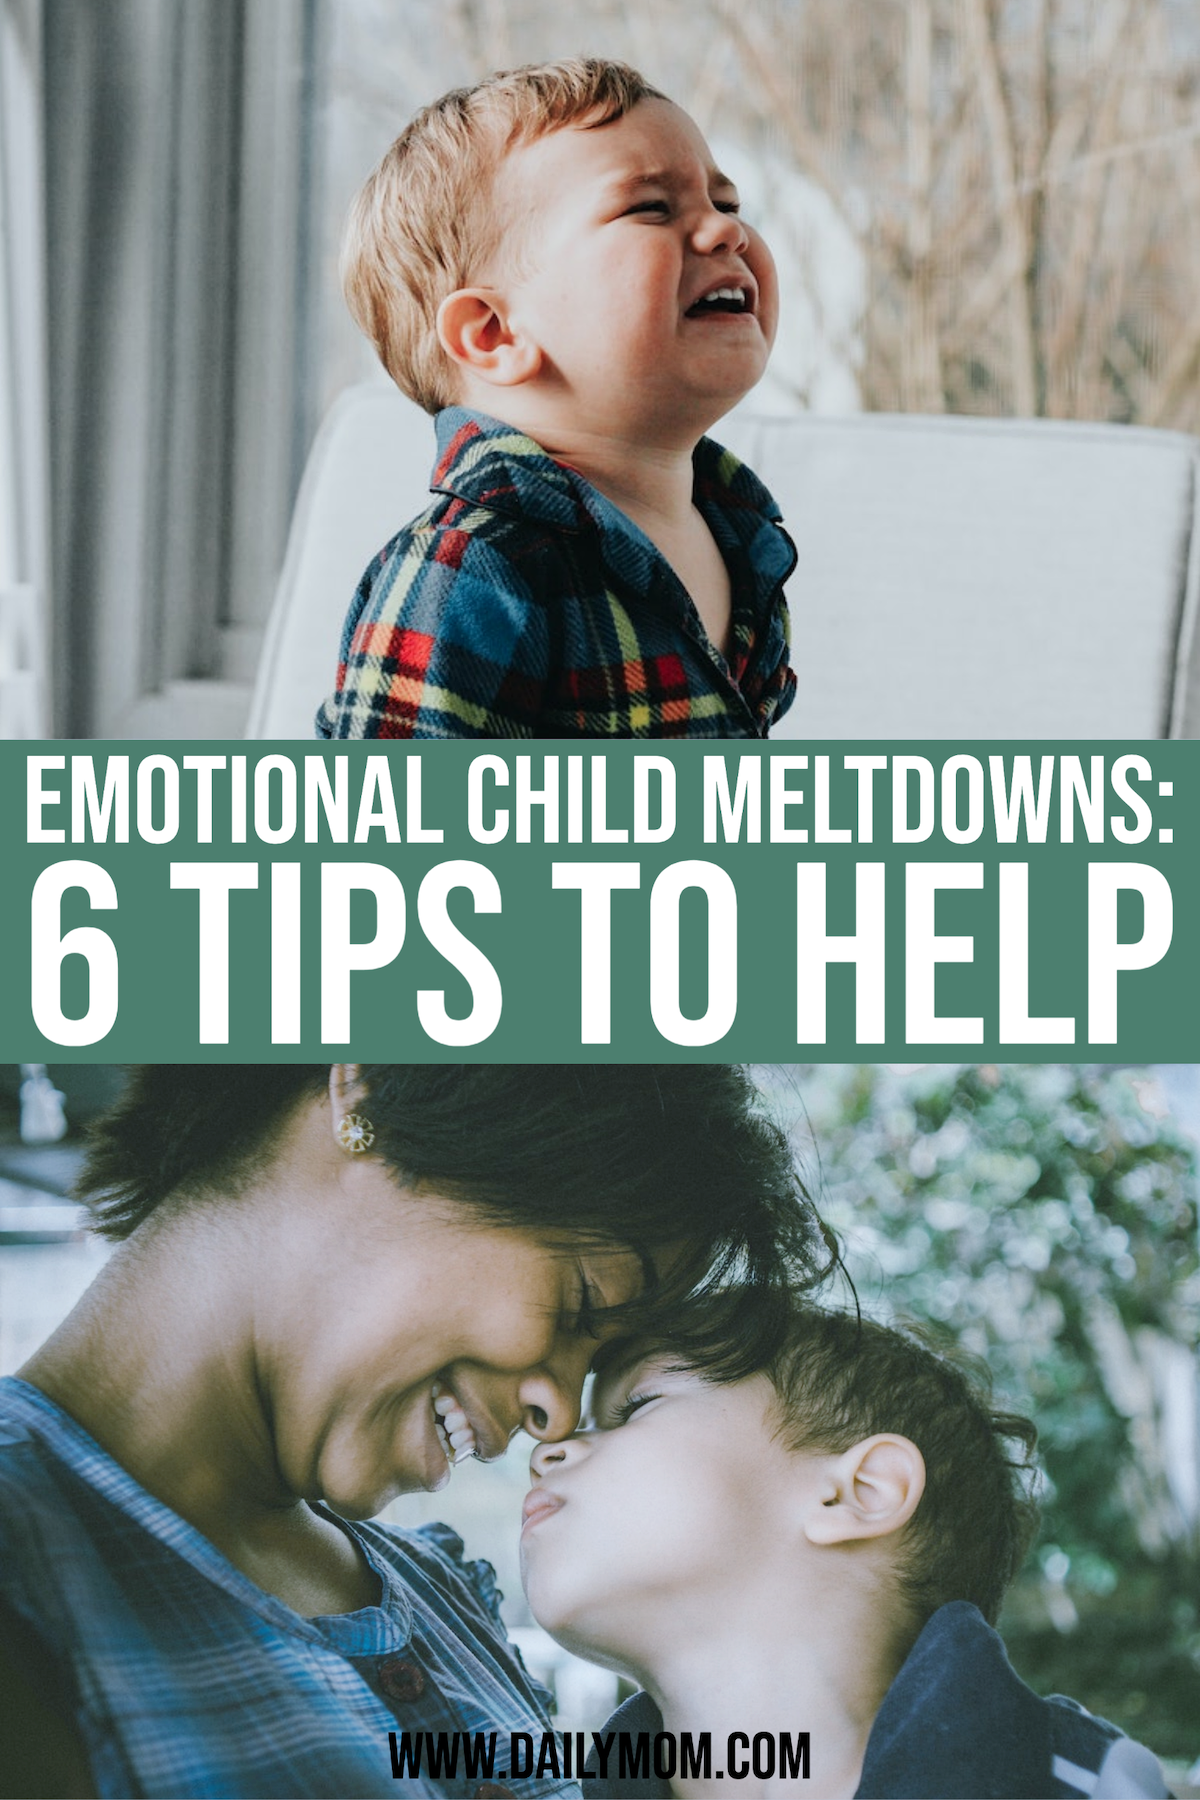 6 Easy Tips For Your Emotional Child During The Next Meltdown